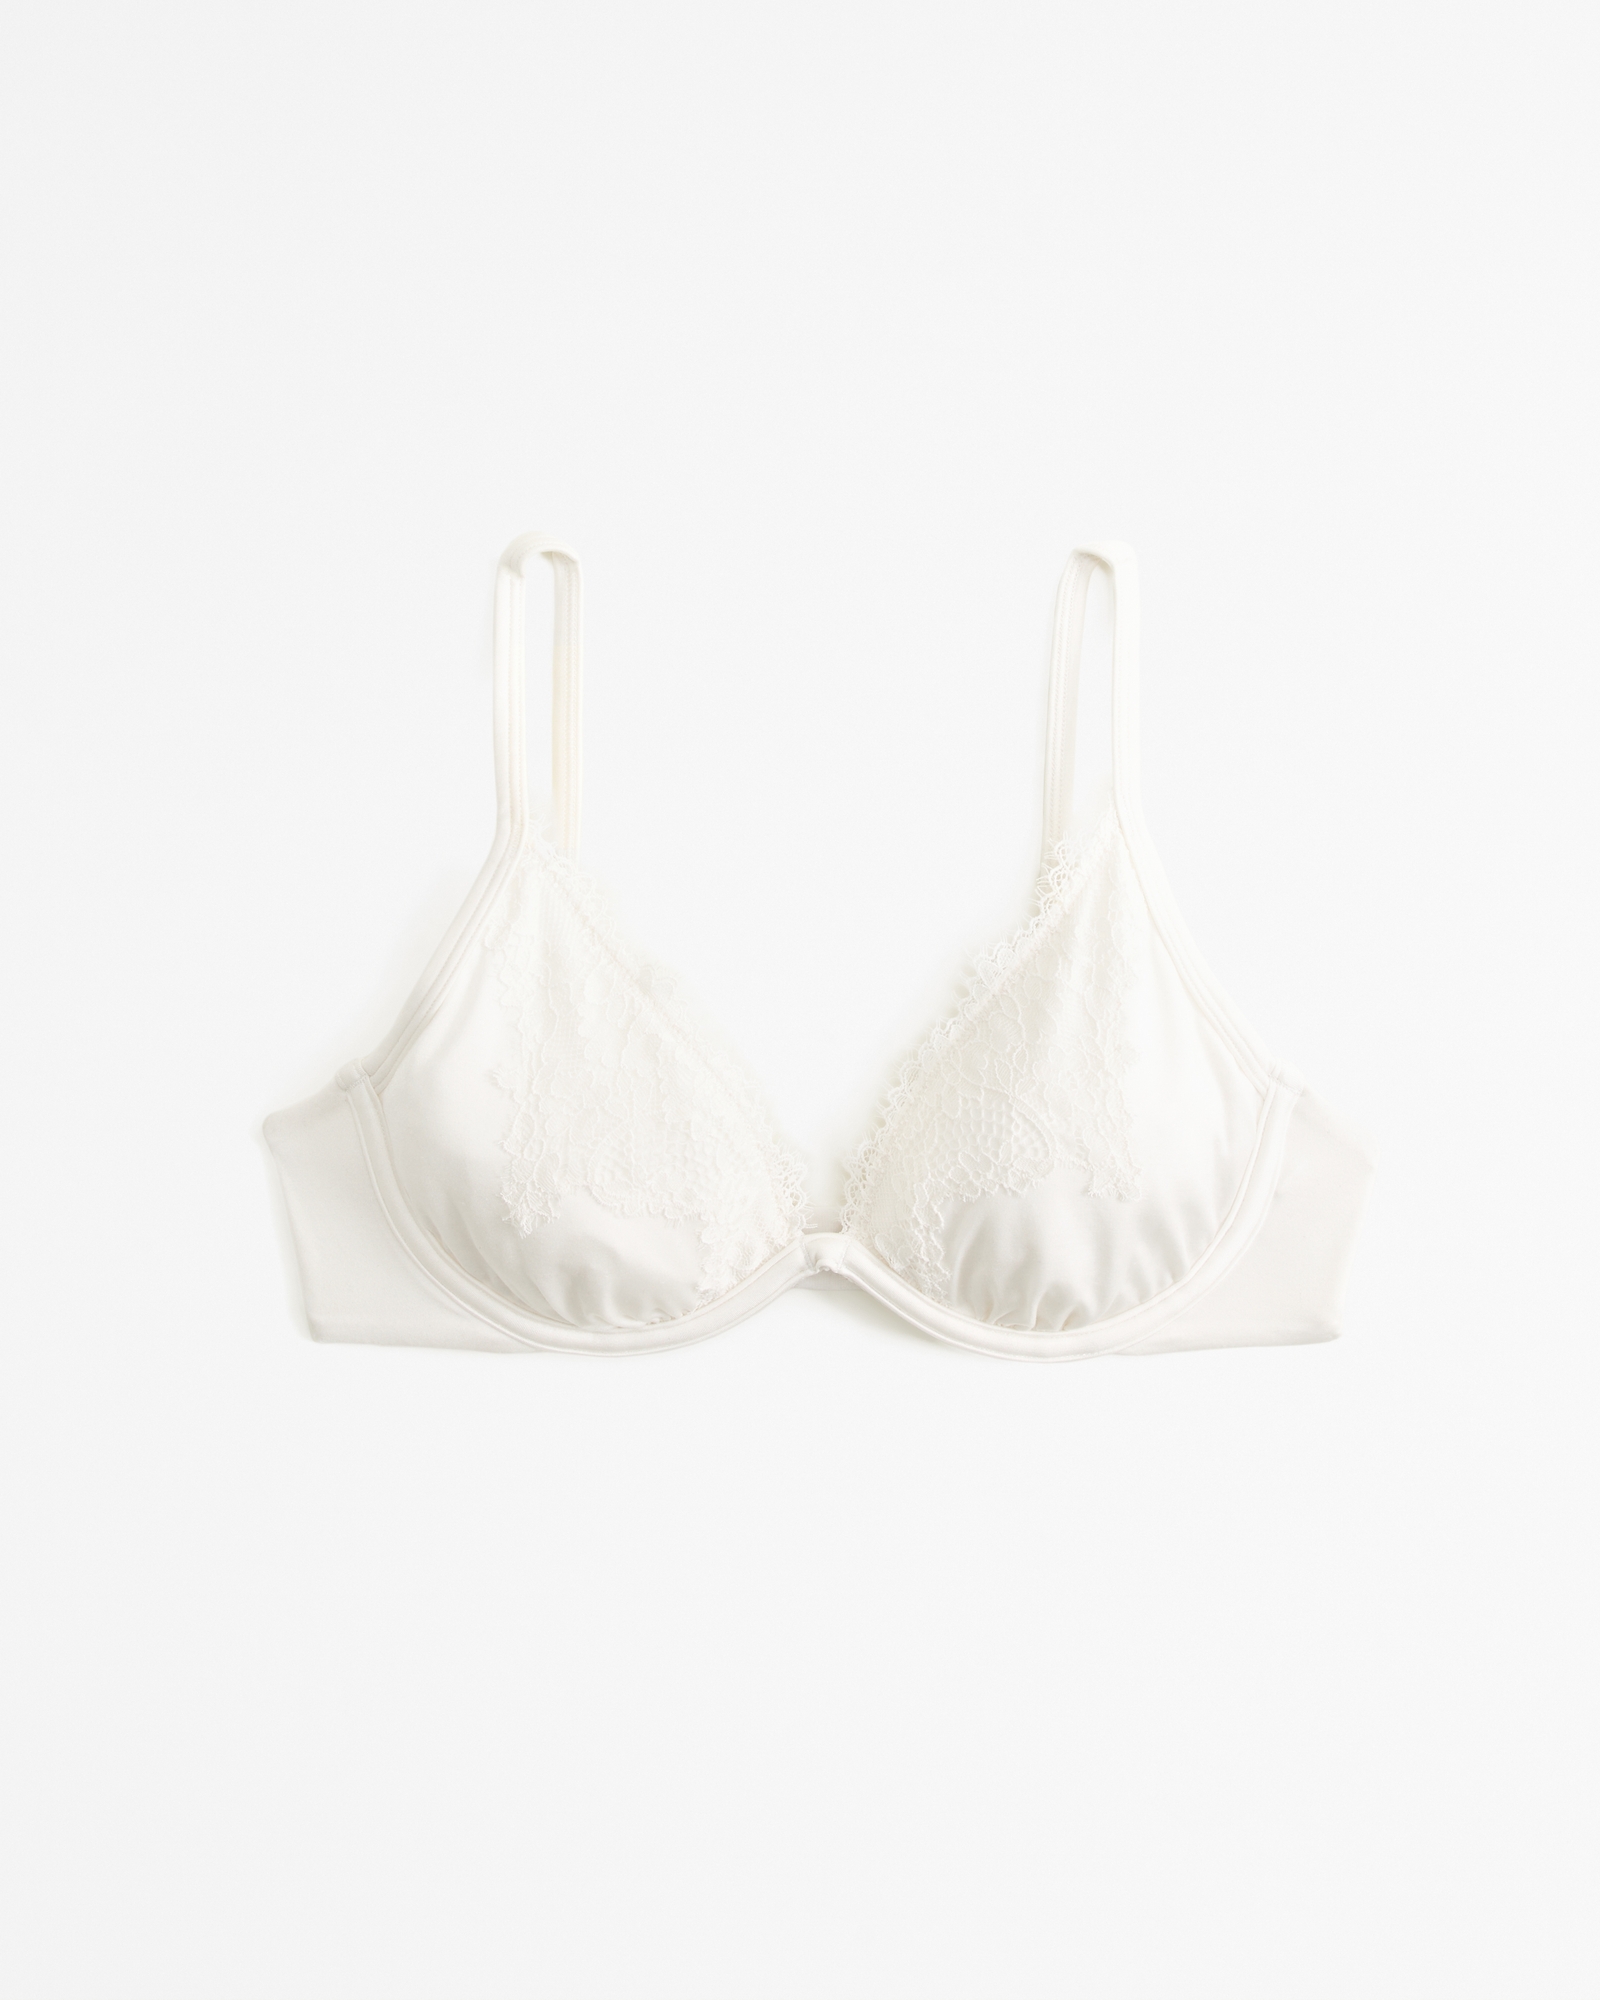 Hollister Gilly Hicks Off White Lace Padded Bralette, Size XS